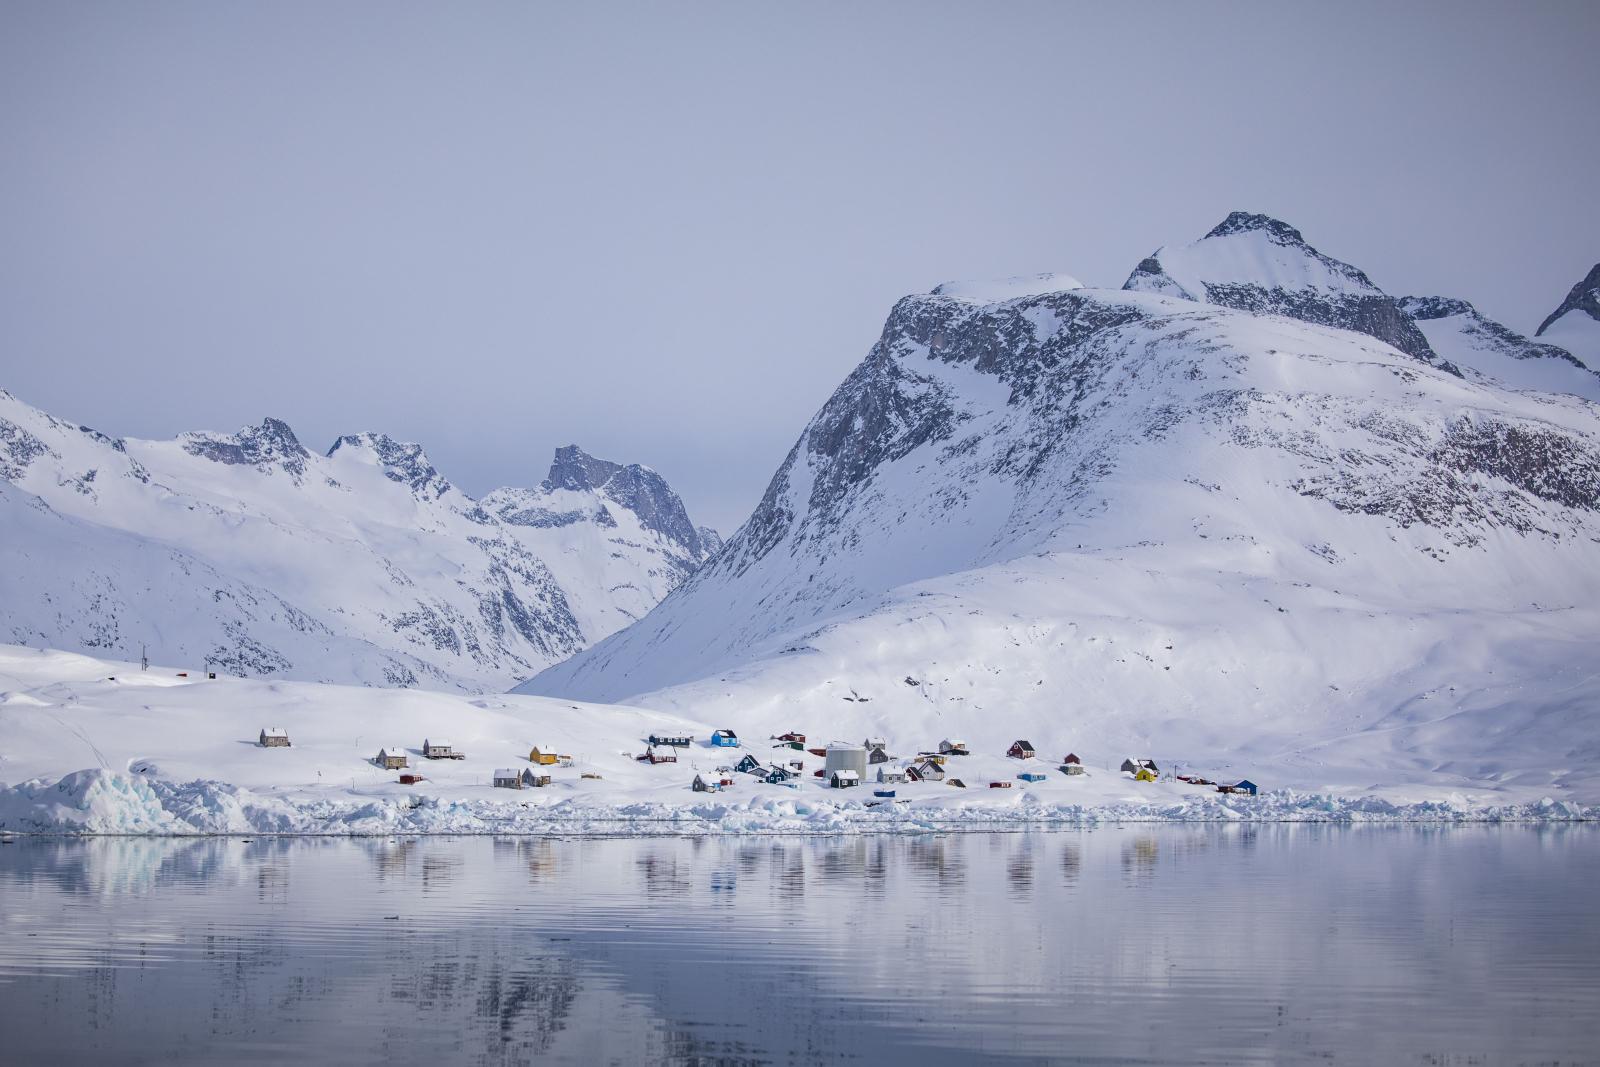 The settlement Tiilerilaaq between towering mountains in winter. Photo by Aningaaq Rosing Carlsen - Visit Greenland